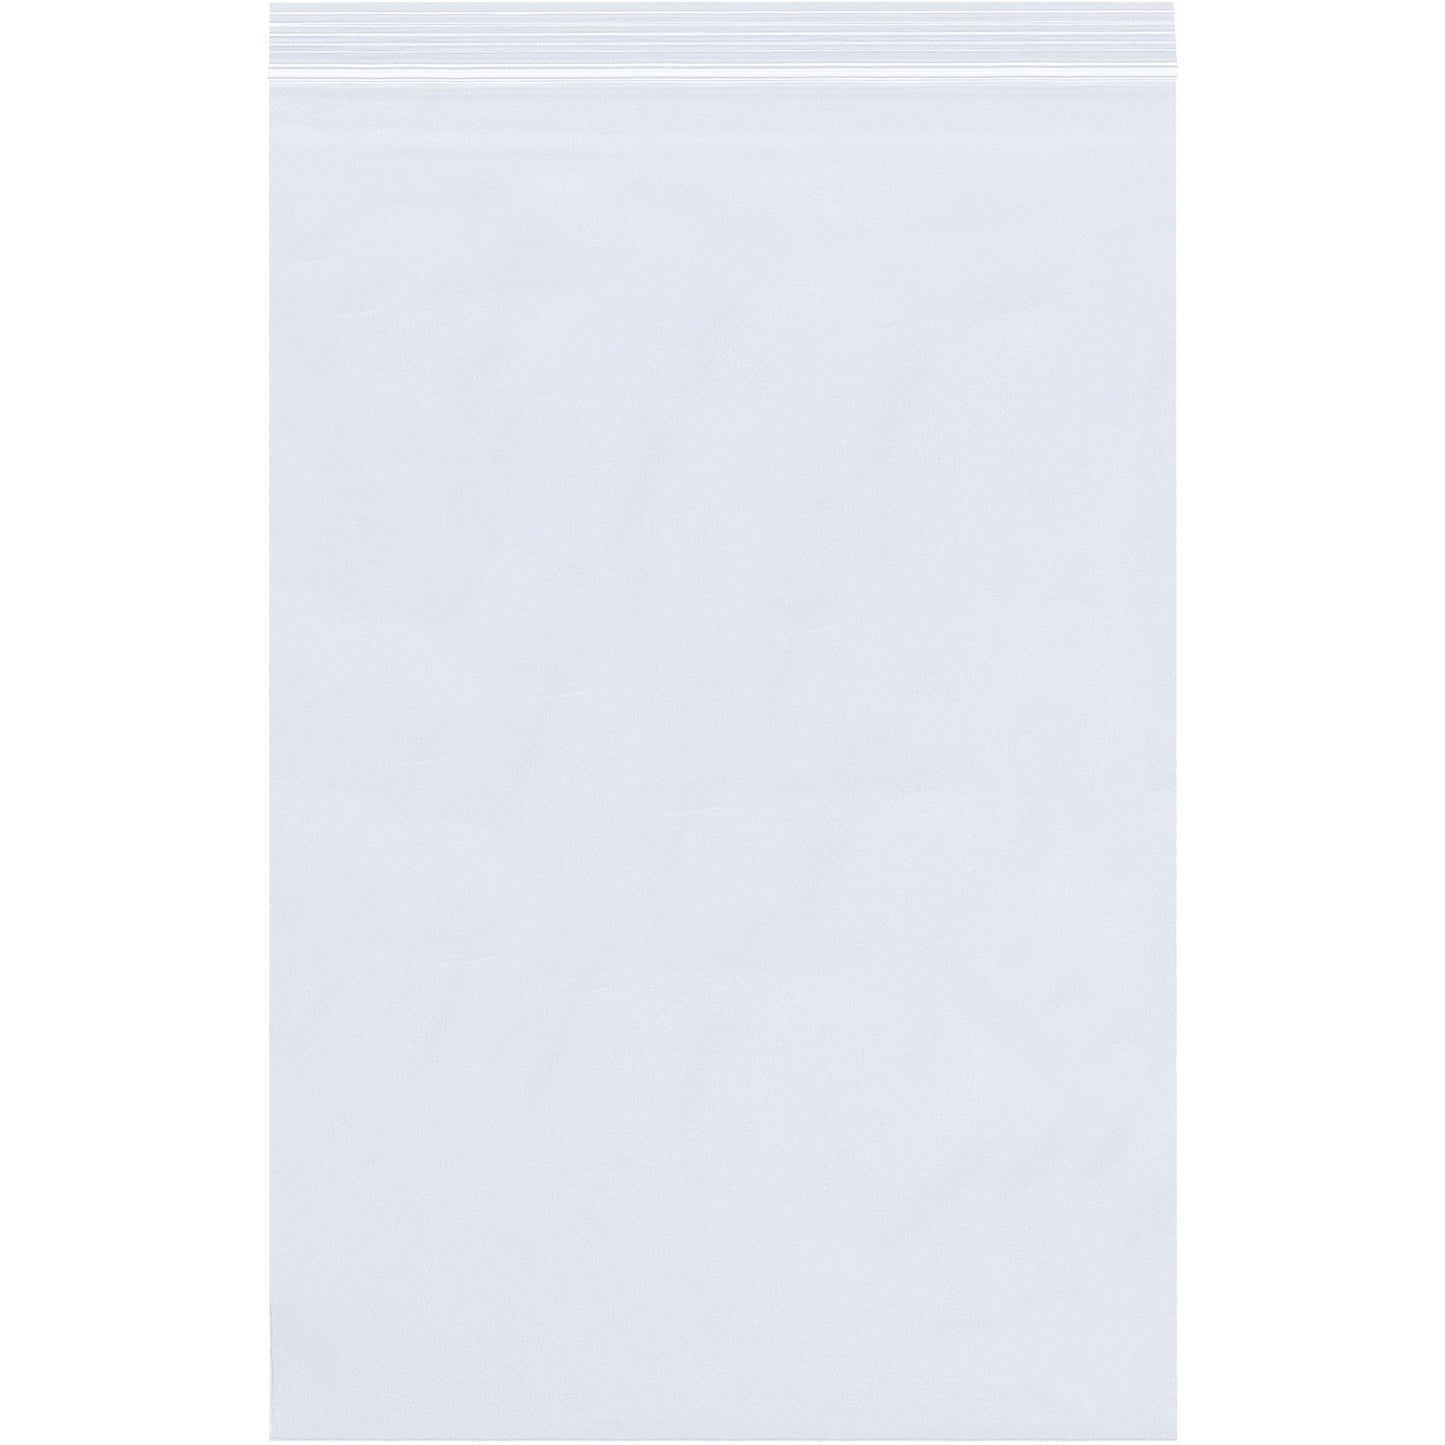 16 x 16" - 6 Mil Reclosable Poly Bags - PB3900